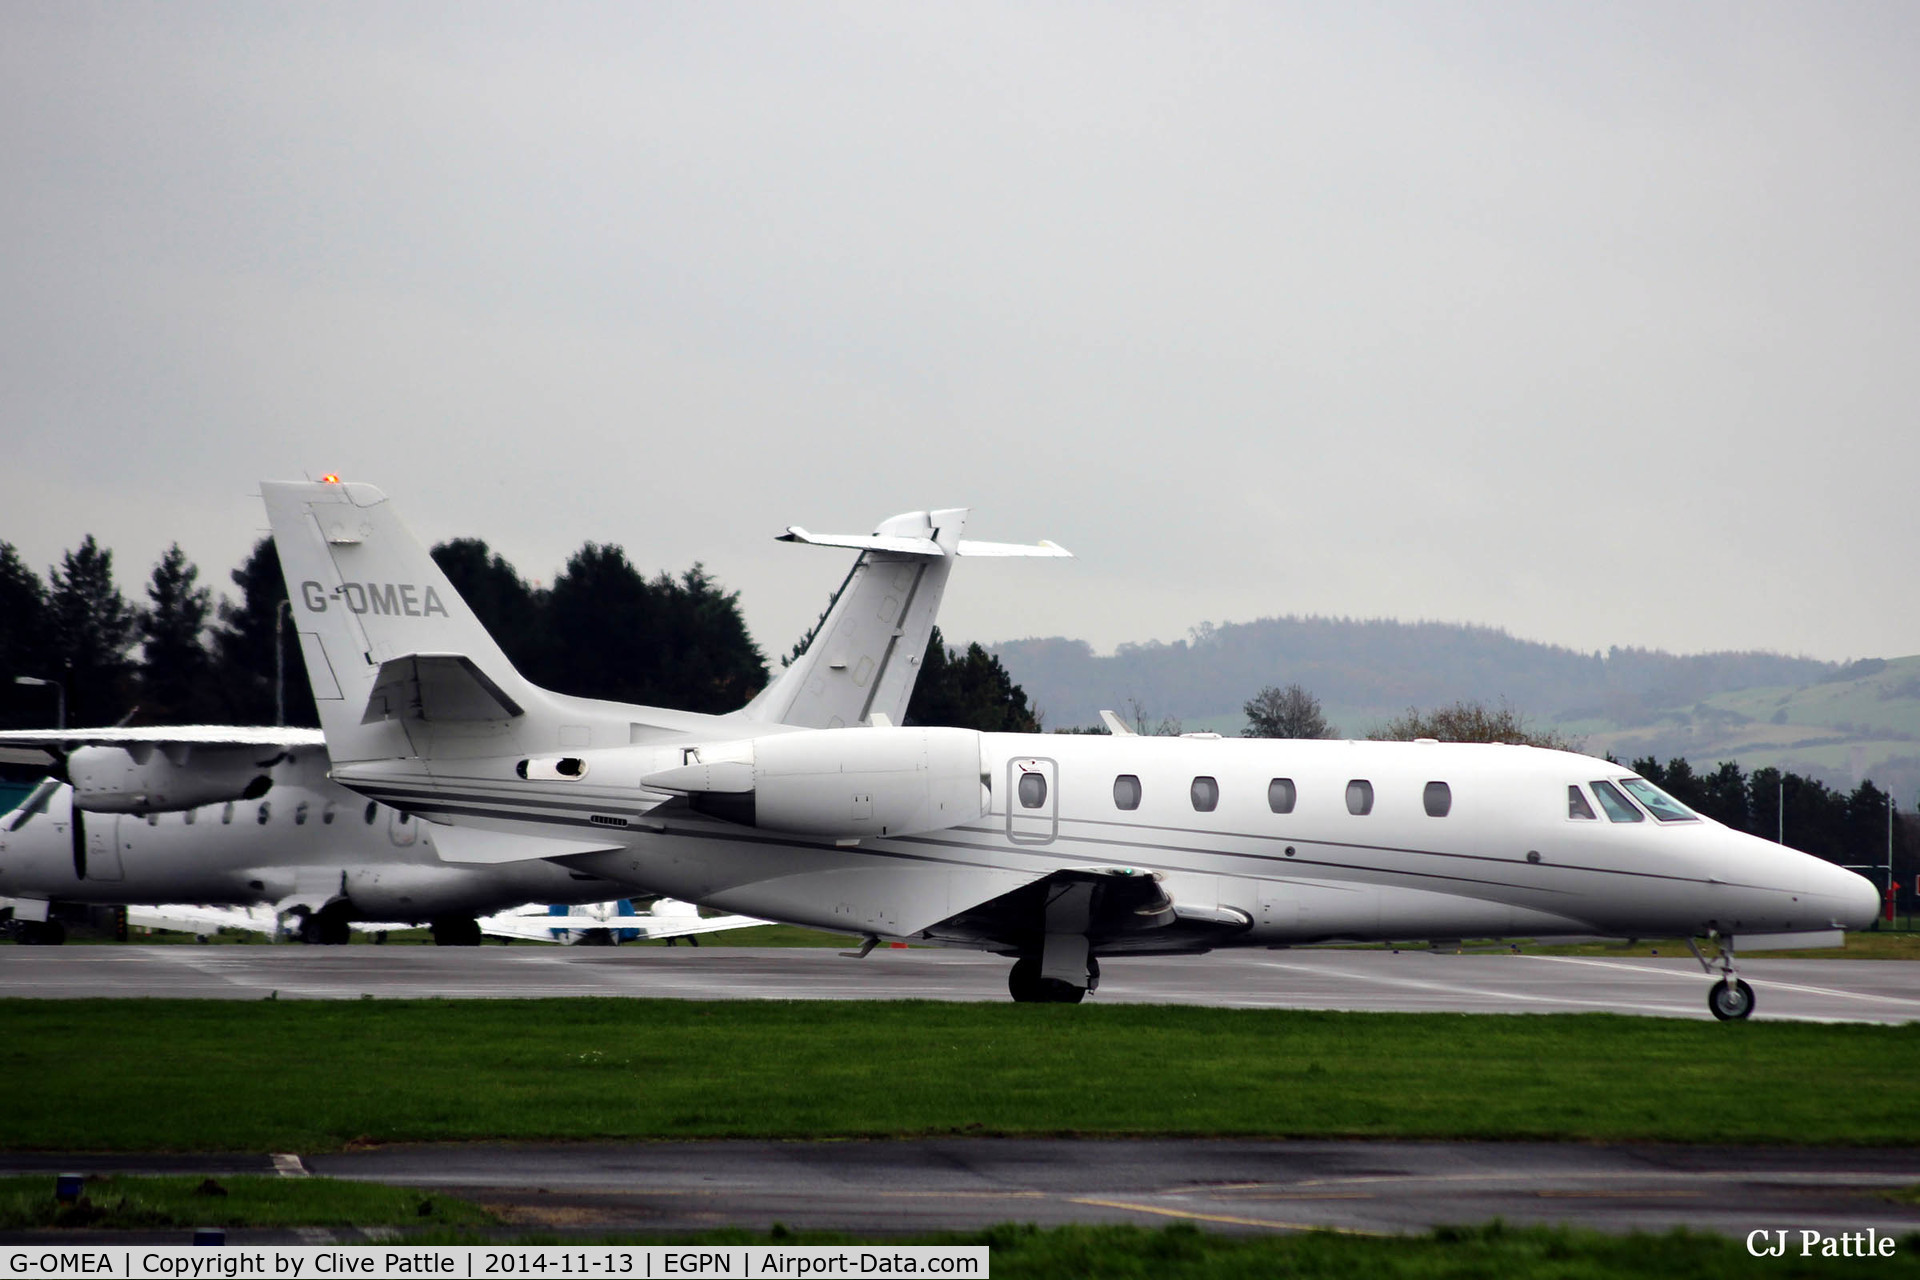 G-OMEA, 2006 Cessna 560XL Citation XLS C/N 560-5610, On the ramp at Dundee Riverside airport EGPN on a wet November day.